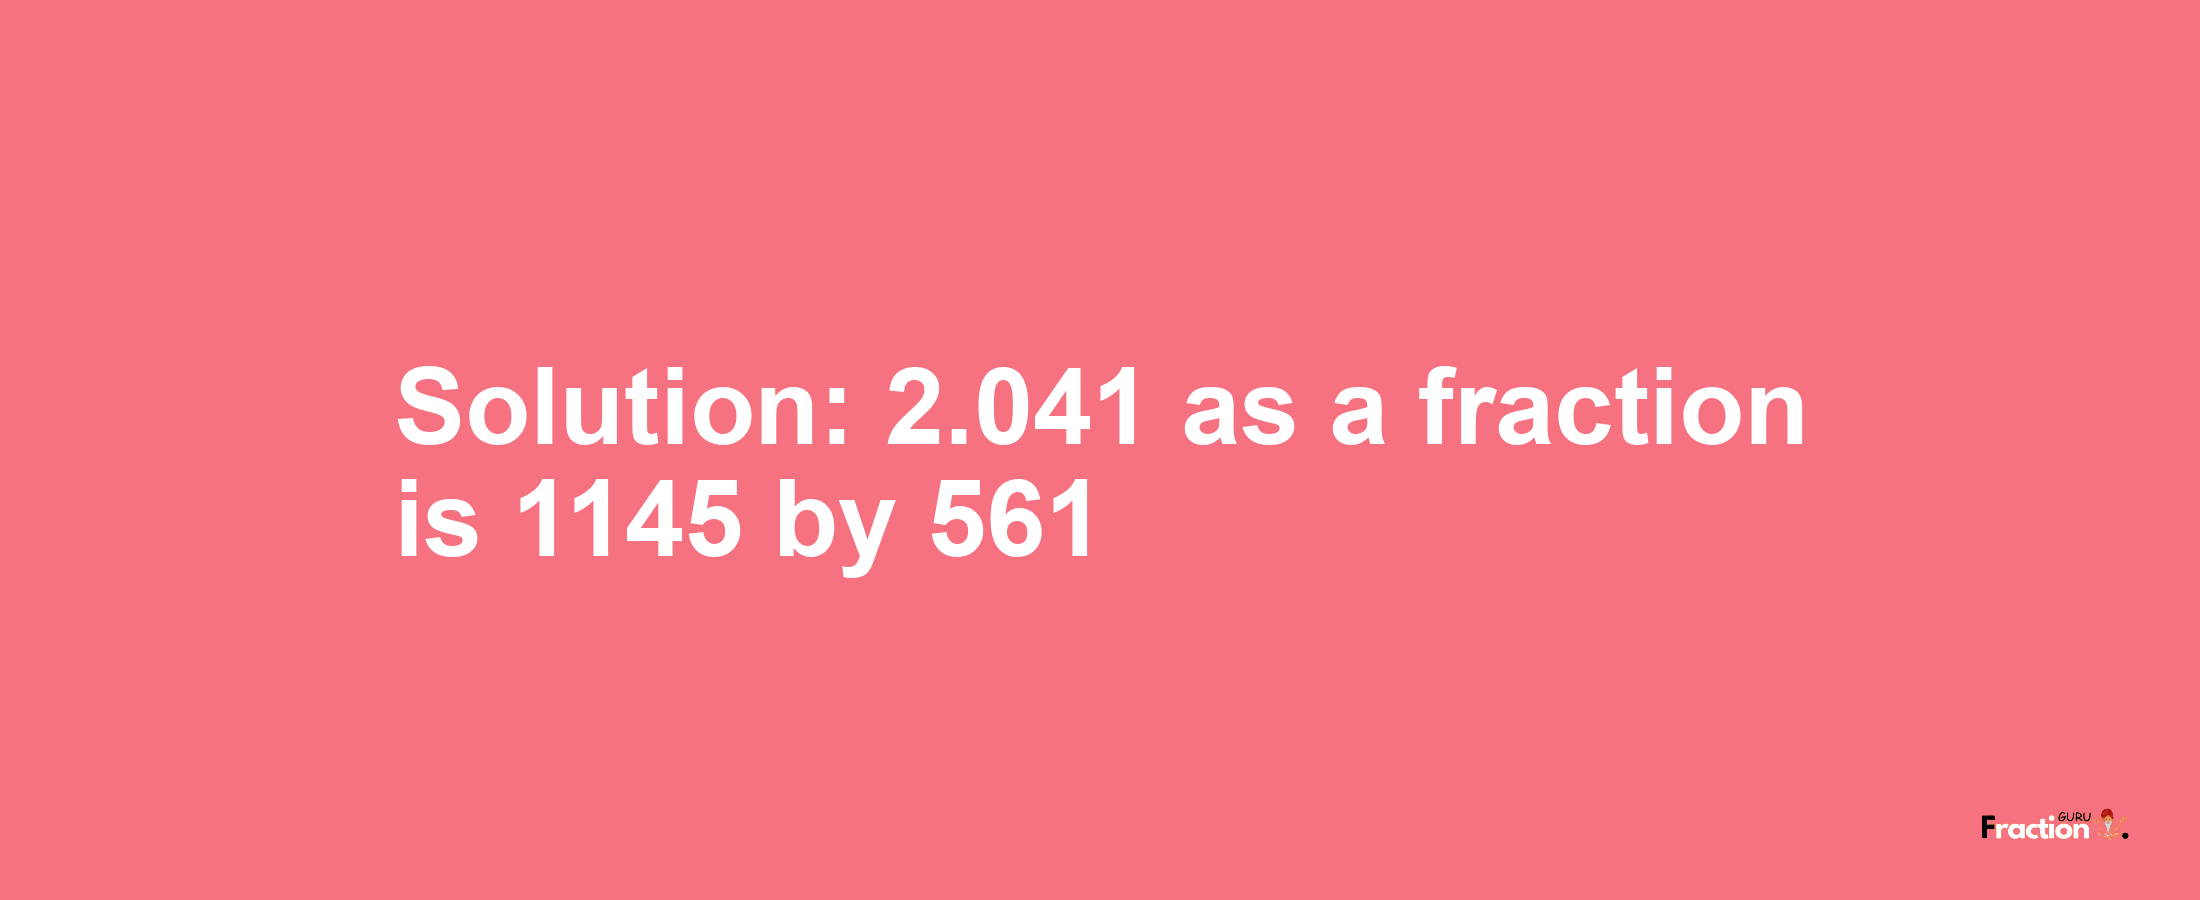 Solution:2.041 as a fraction is 1145/561